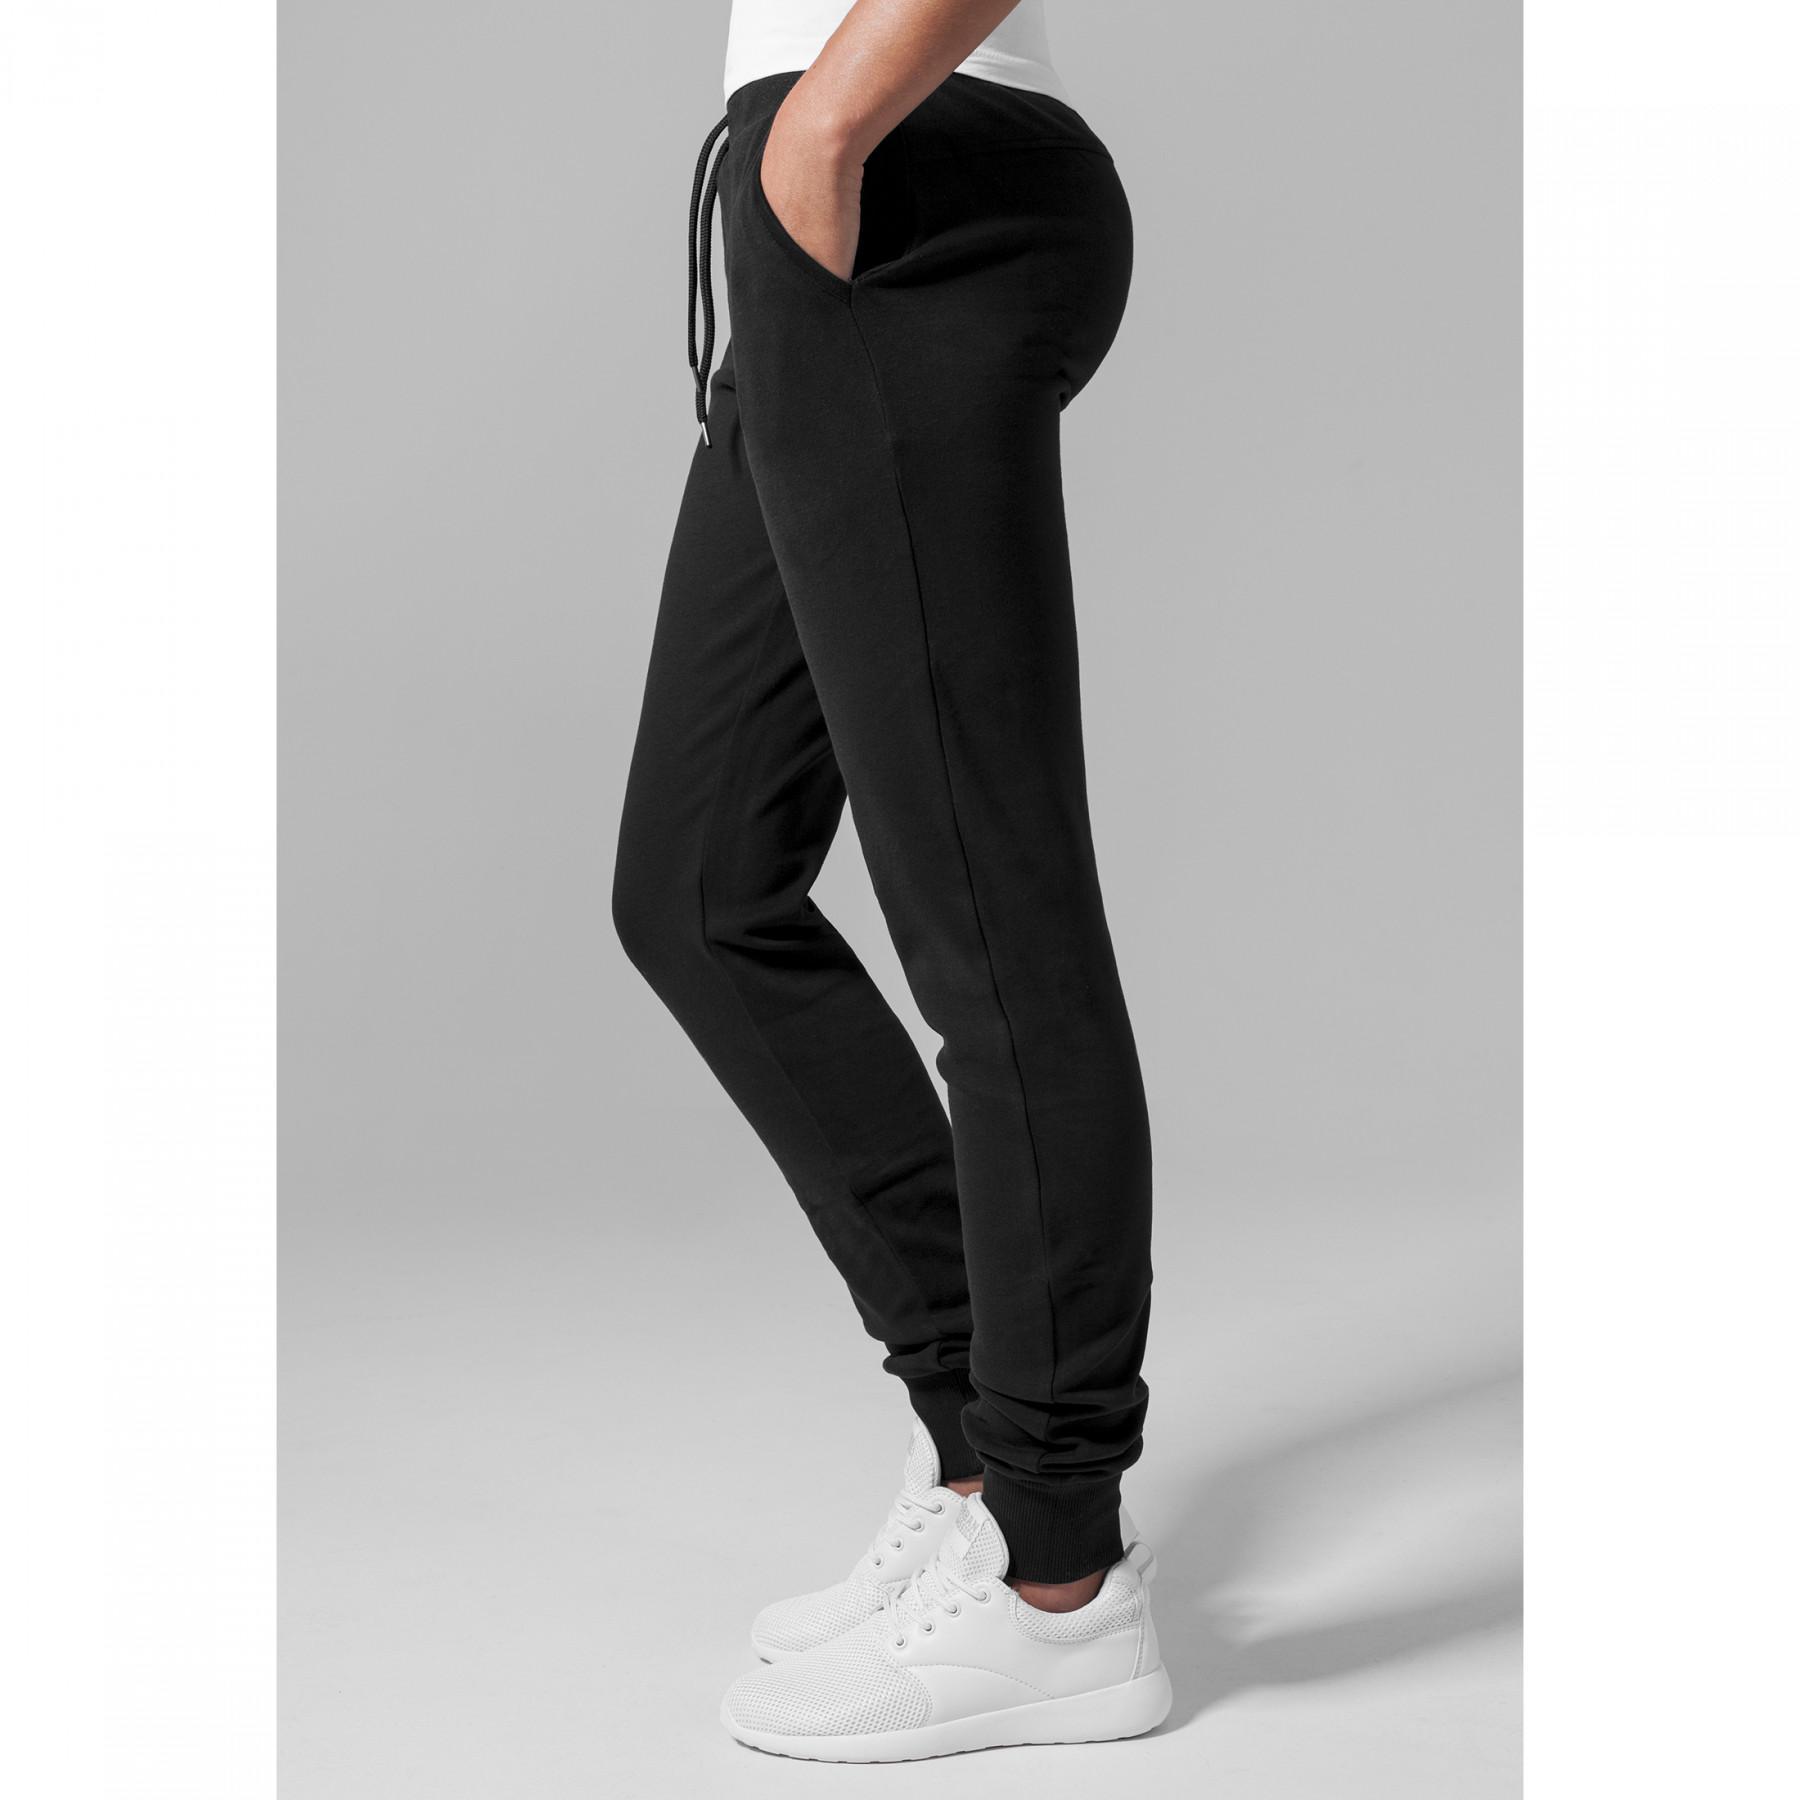 Trousers woman Urban Classic athletic